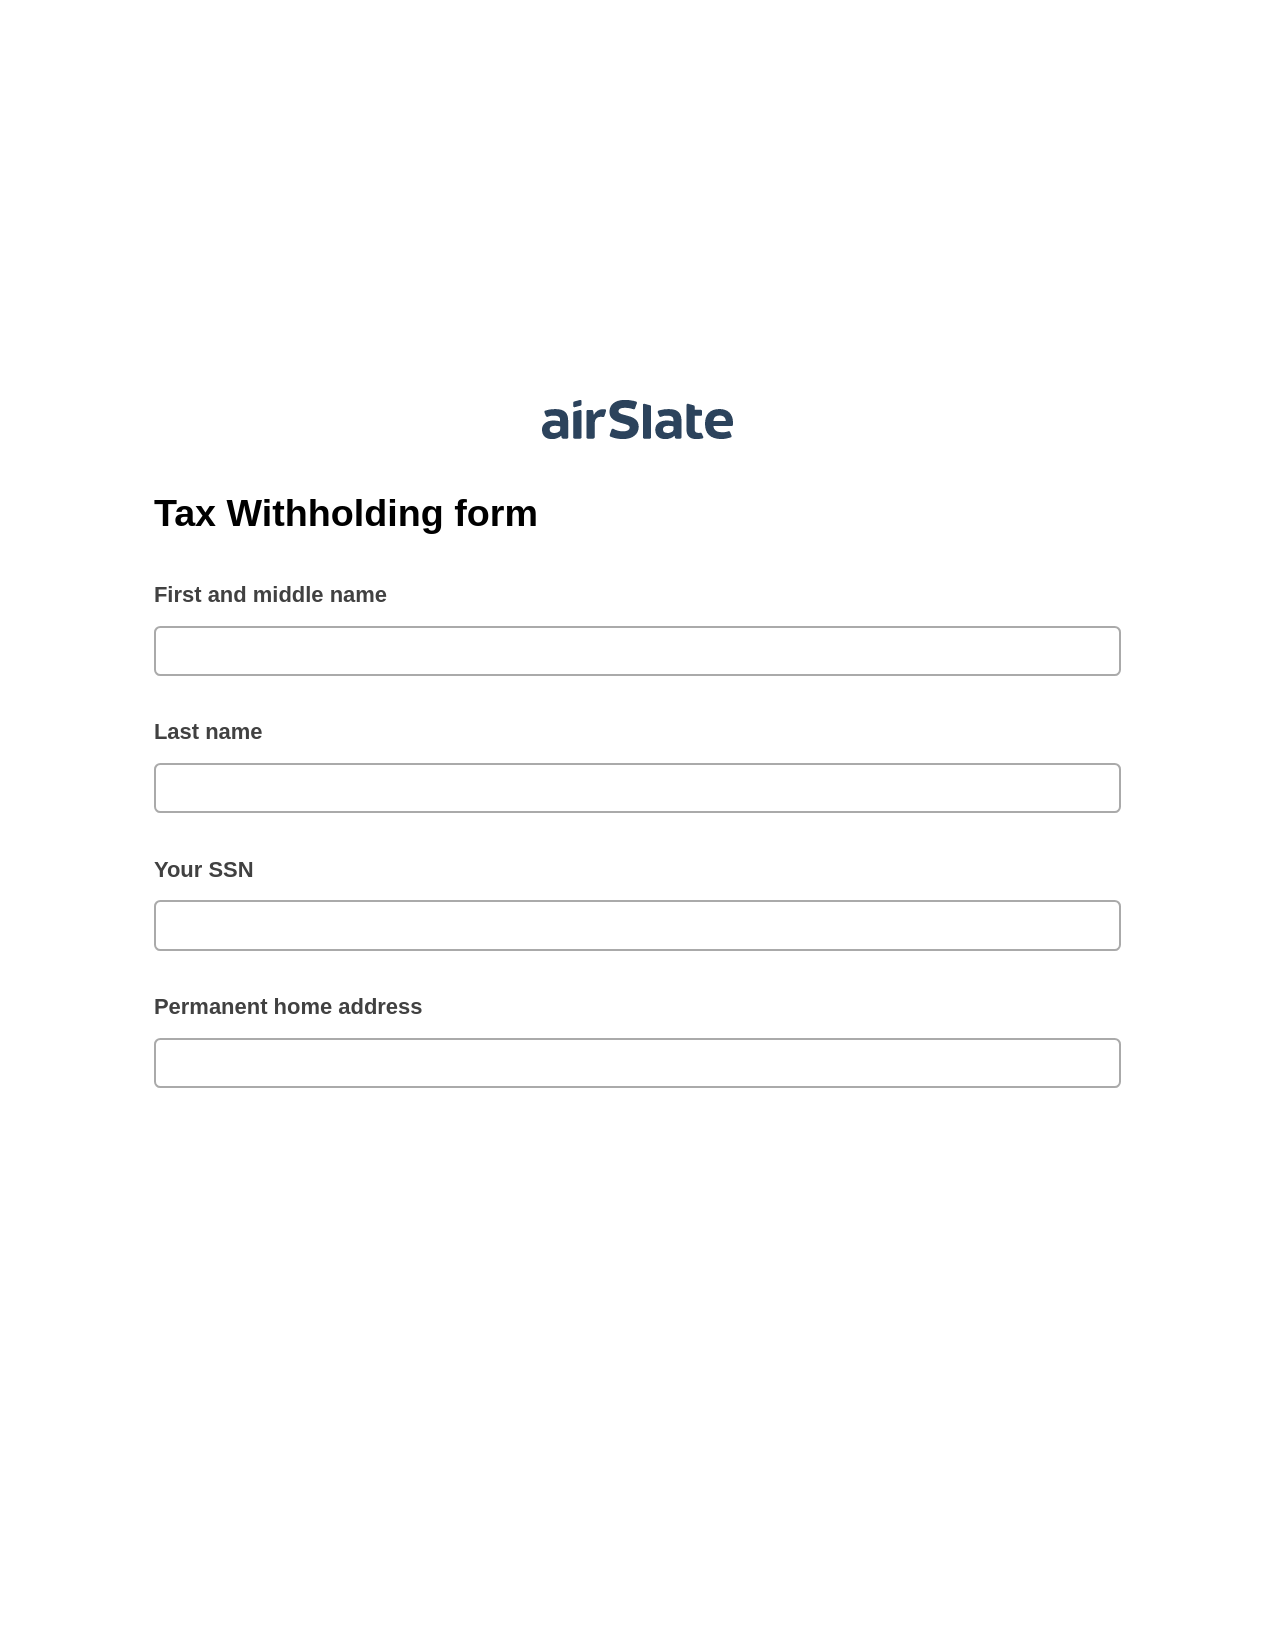 Tax Withholding form Pre-fill Document Bot, Assign Roles to Recipients Bot, Email Notification Postfinish Bot